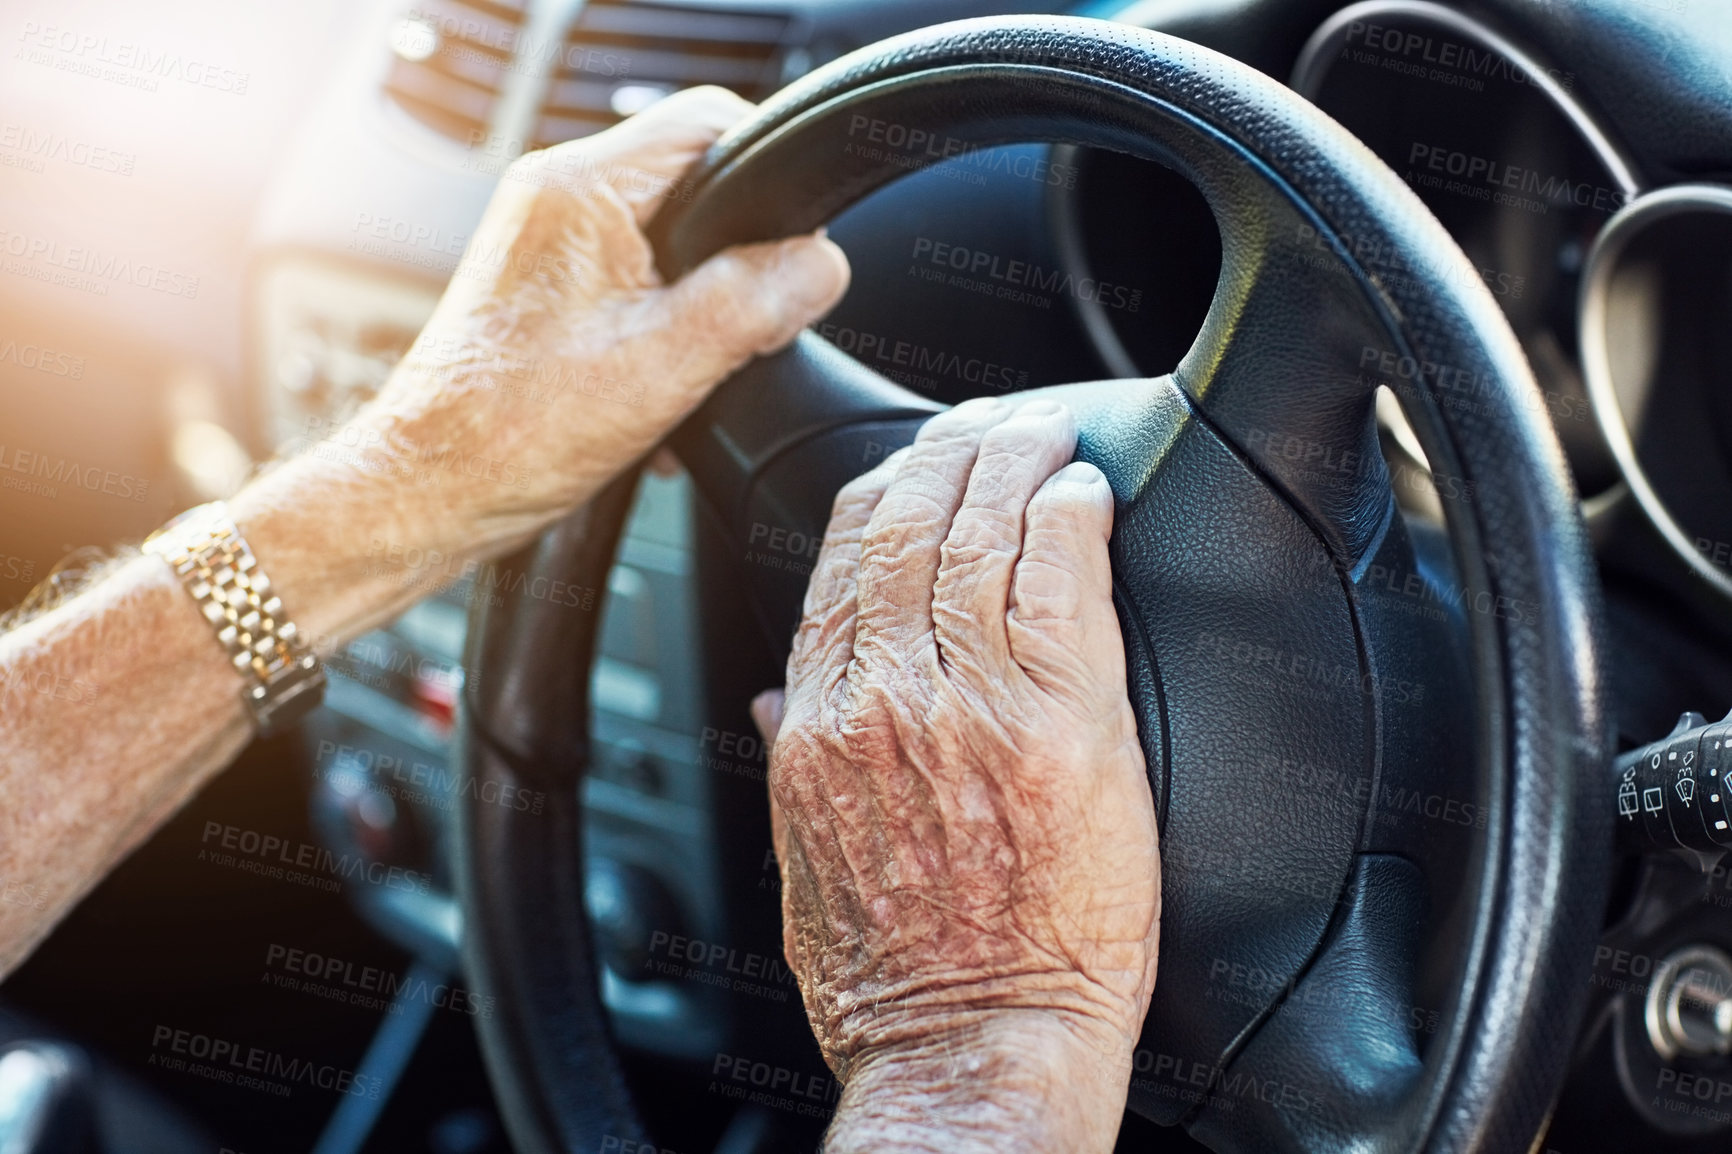 Buy stock photo Closeup of an unrecognizable senior man's hands on the steering wheel of his car